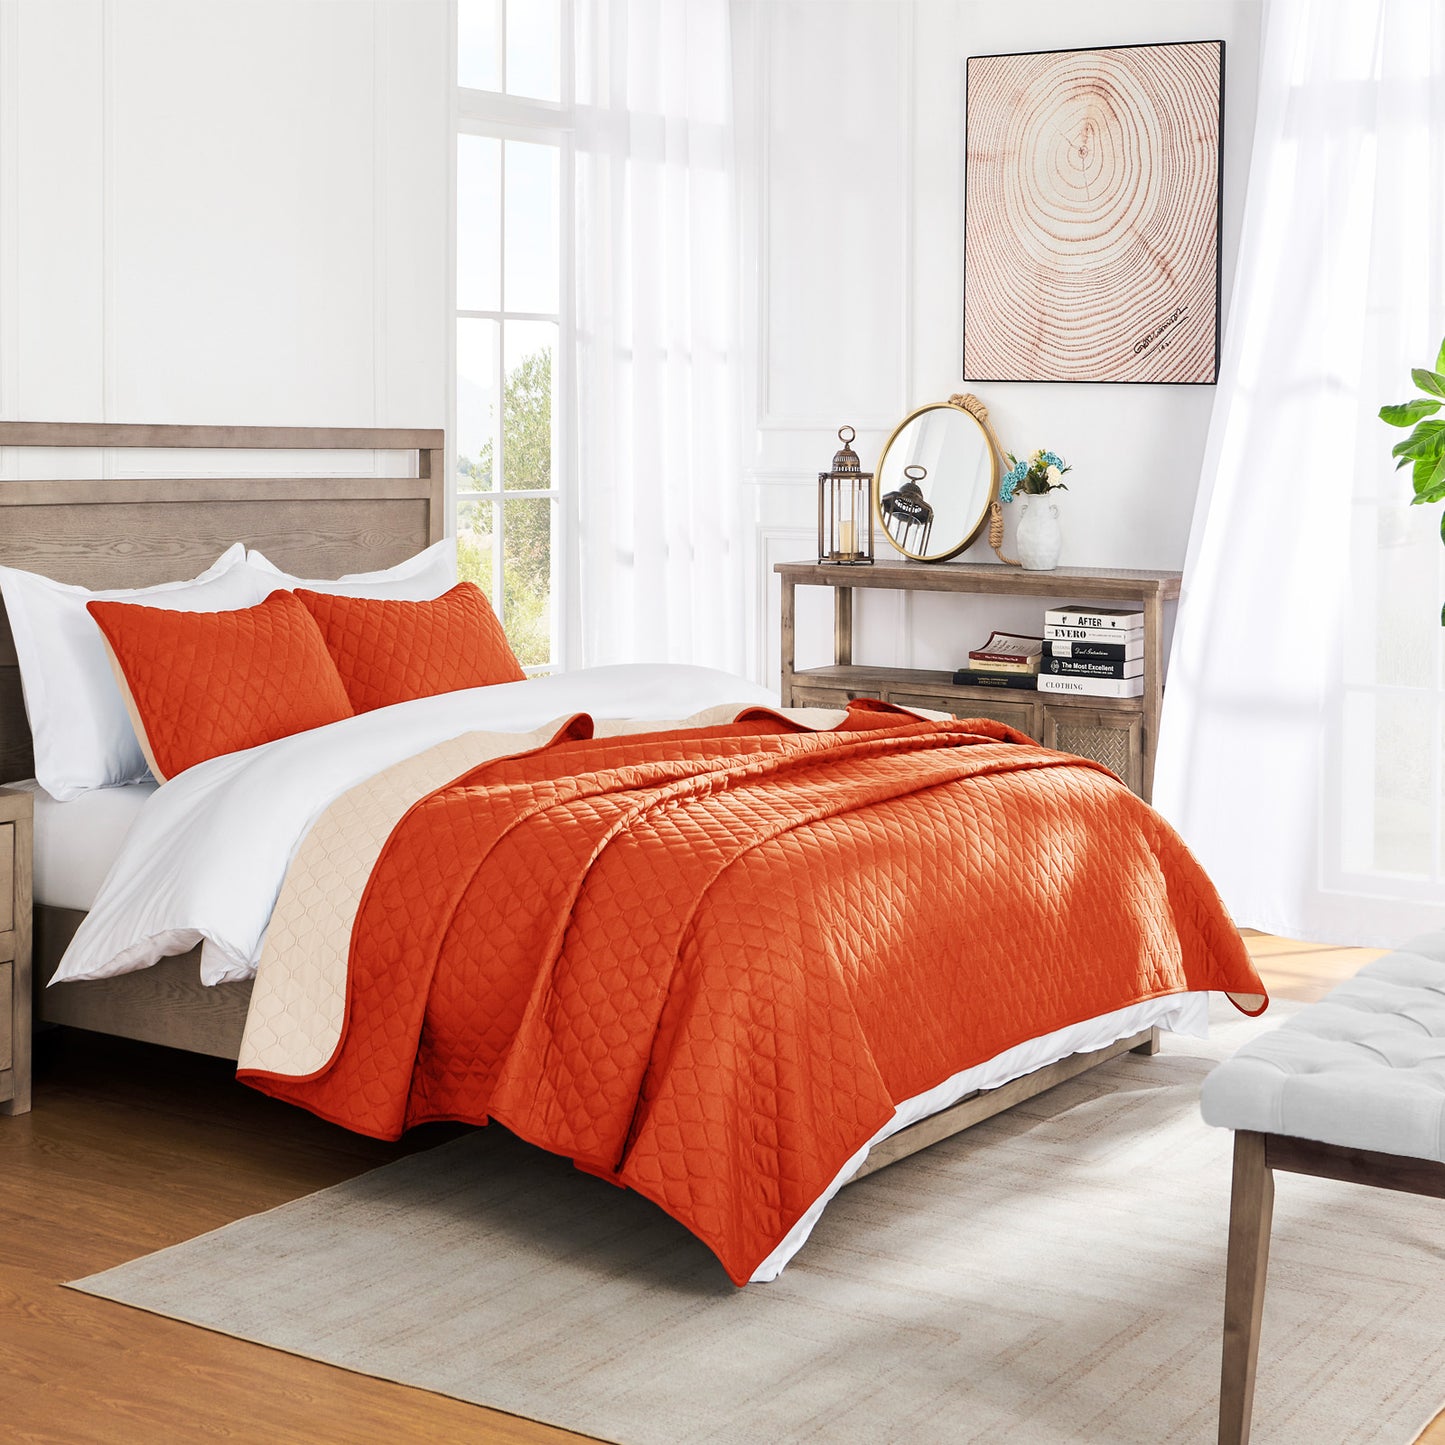 Exclusivo Mezcla Ultrasonic King Size Quilt Bedding Set with Pillow Shams, Lightweight Quilts King Size, Soft Bedspreads Bed Coverlets for All Seasons - (Burnt Orange, 104"x96")